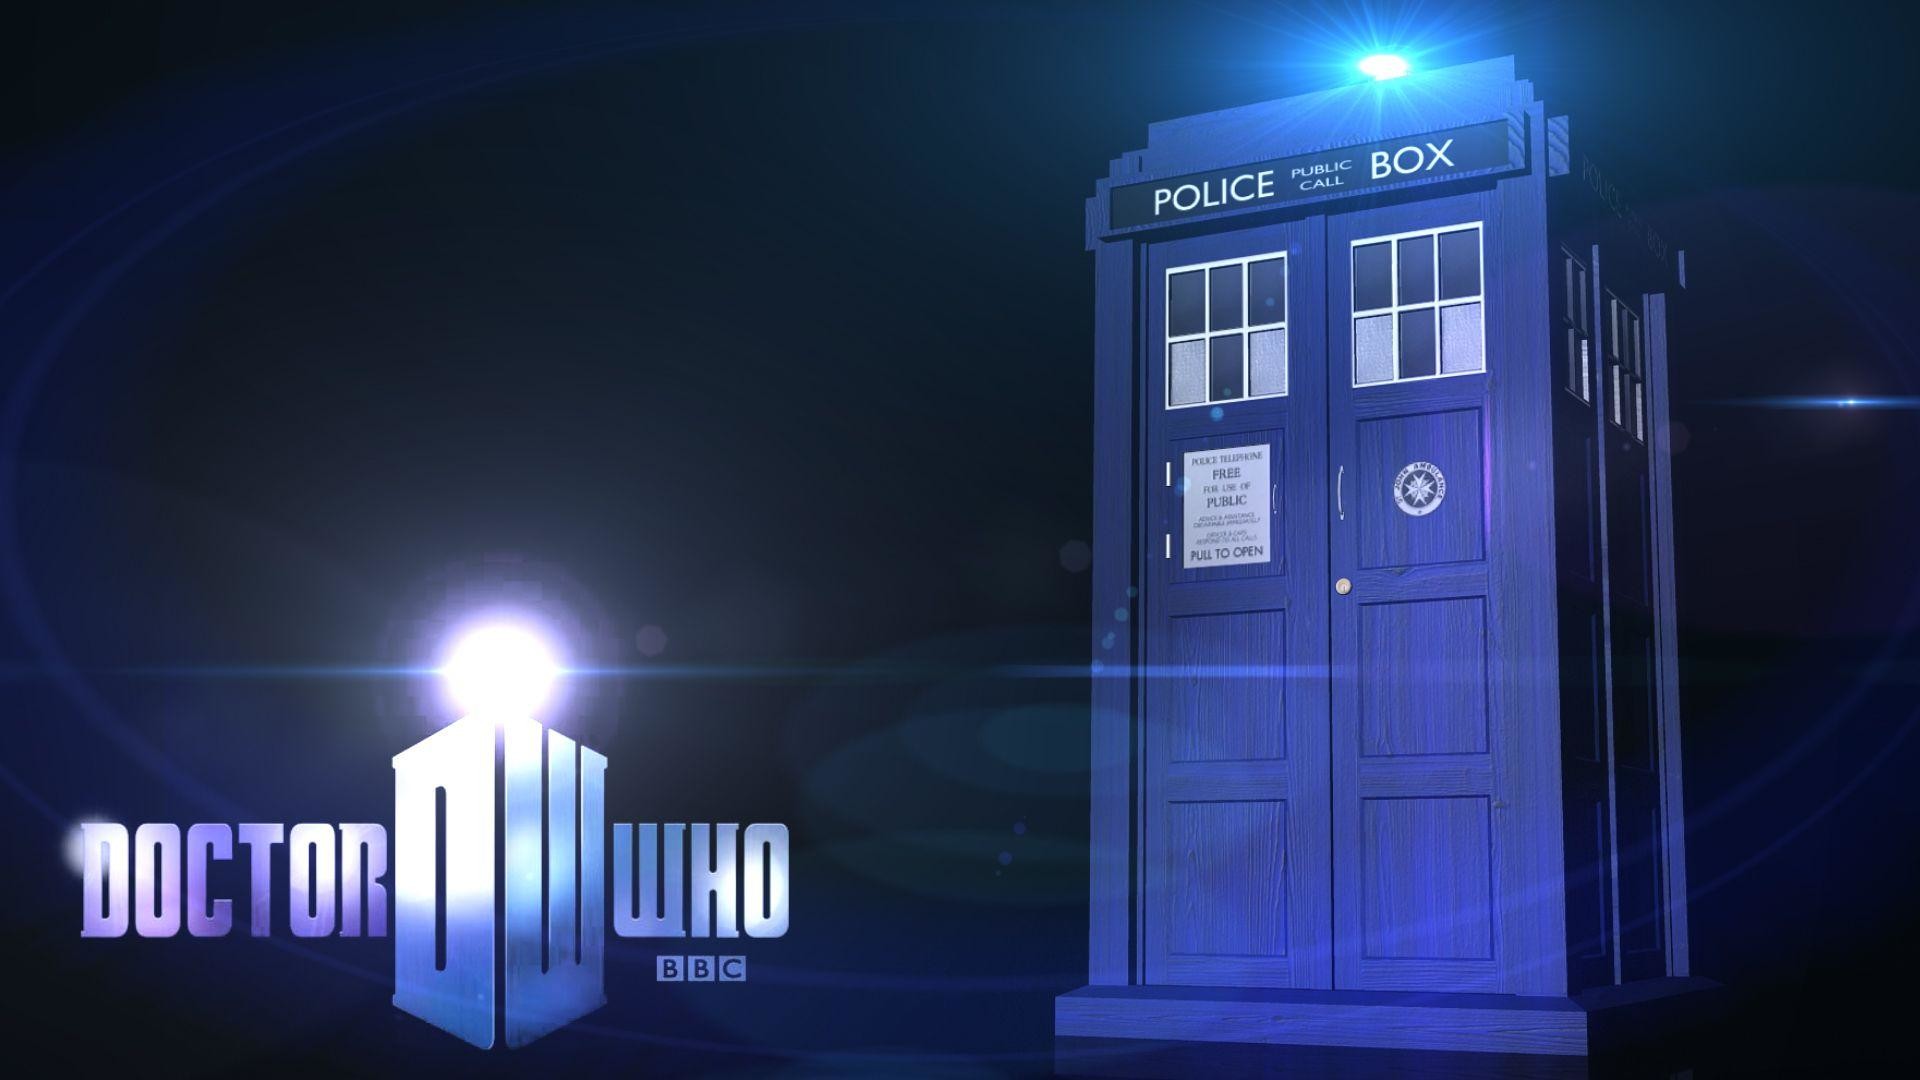 1920x1080 Doctor Who Series images New TARDIS interior wallpaper and 1920Ã1080